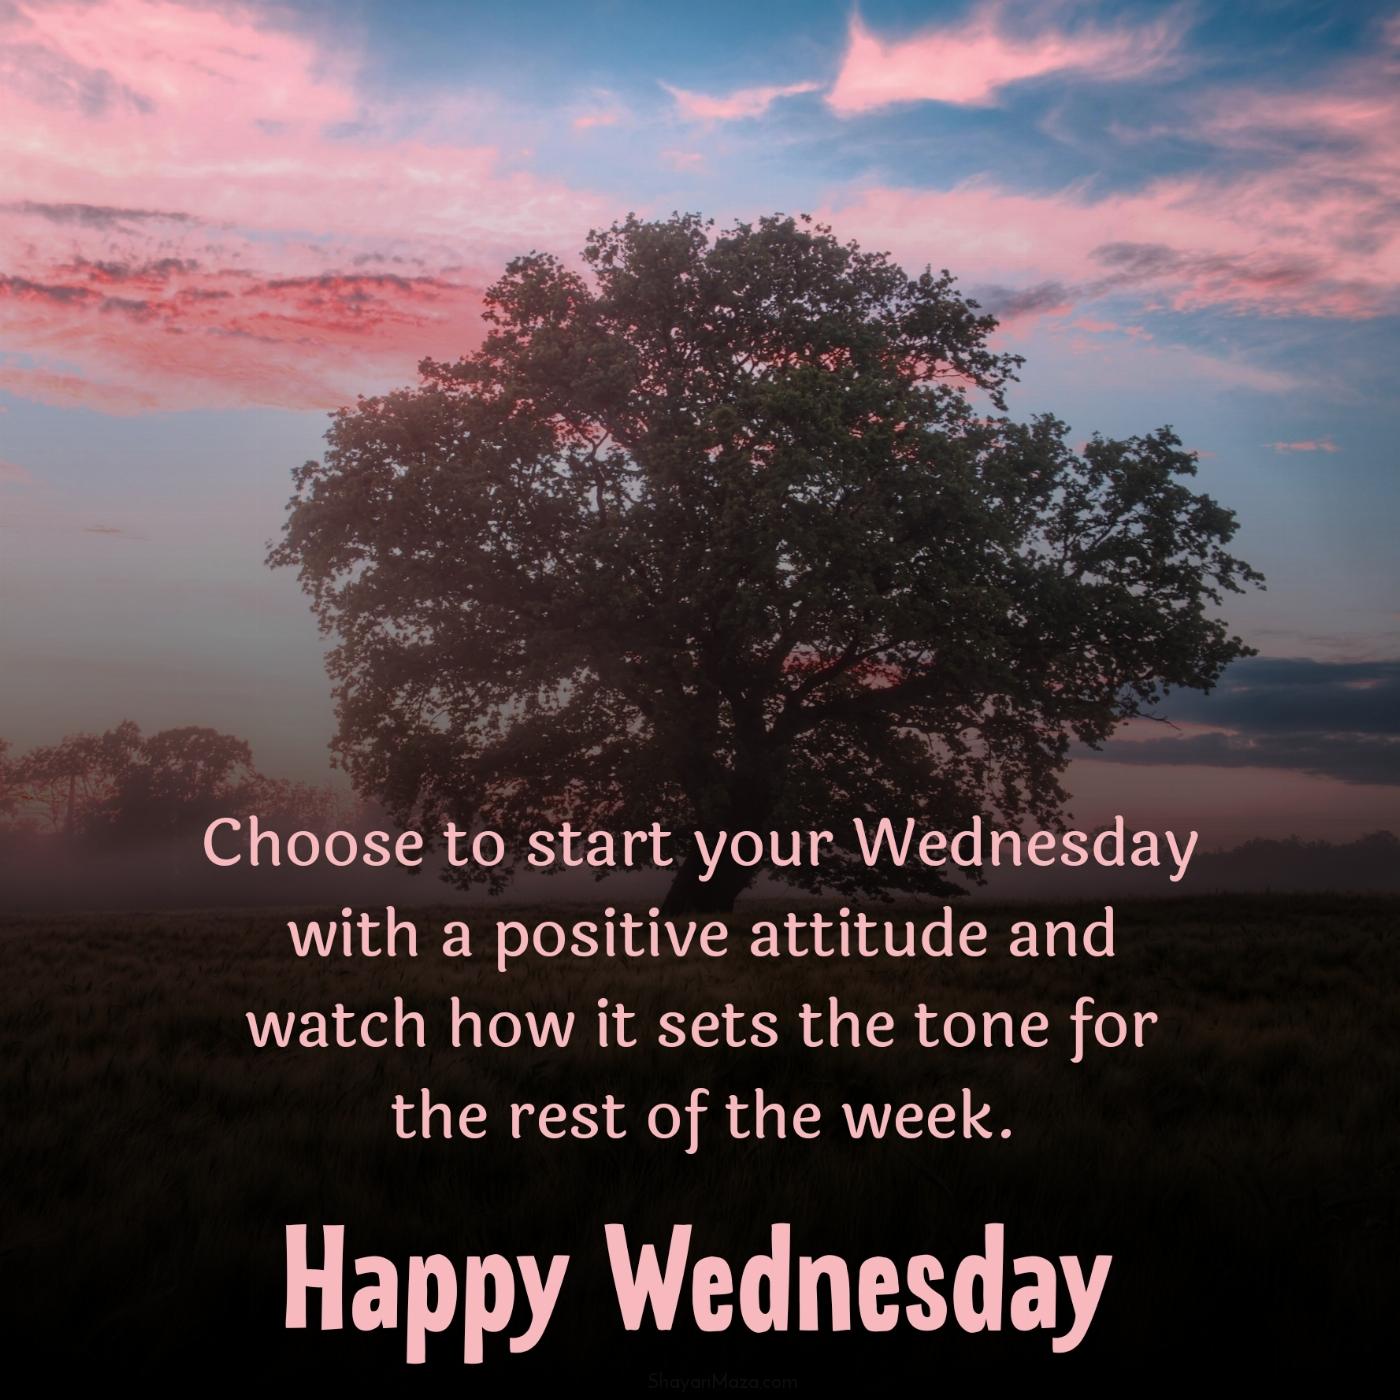 Choose to start your Wednesday with a positive attitude